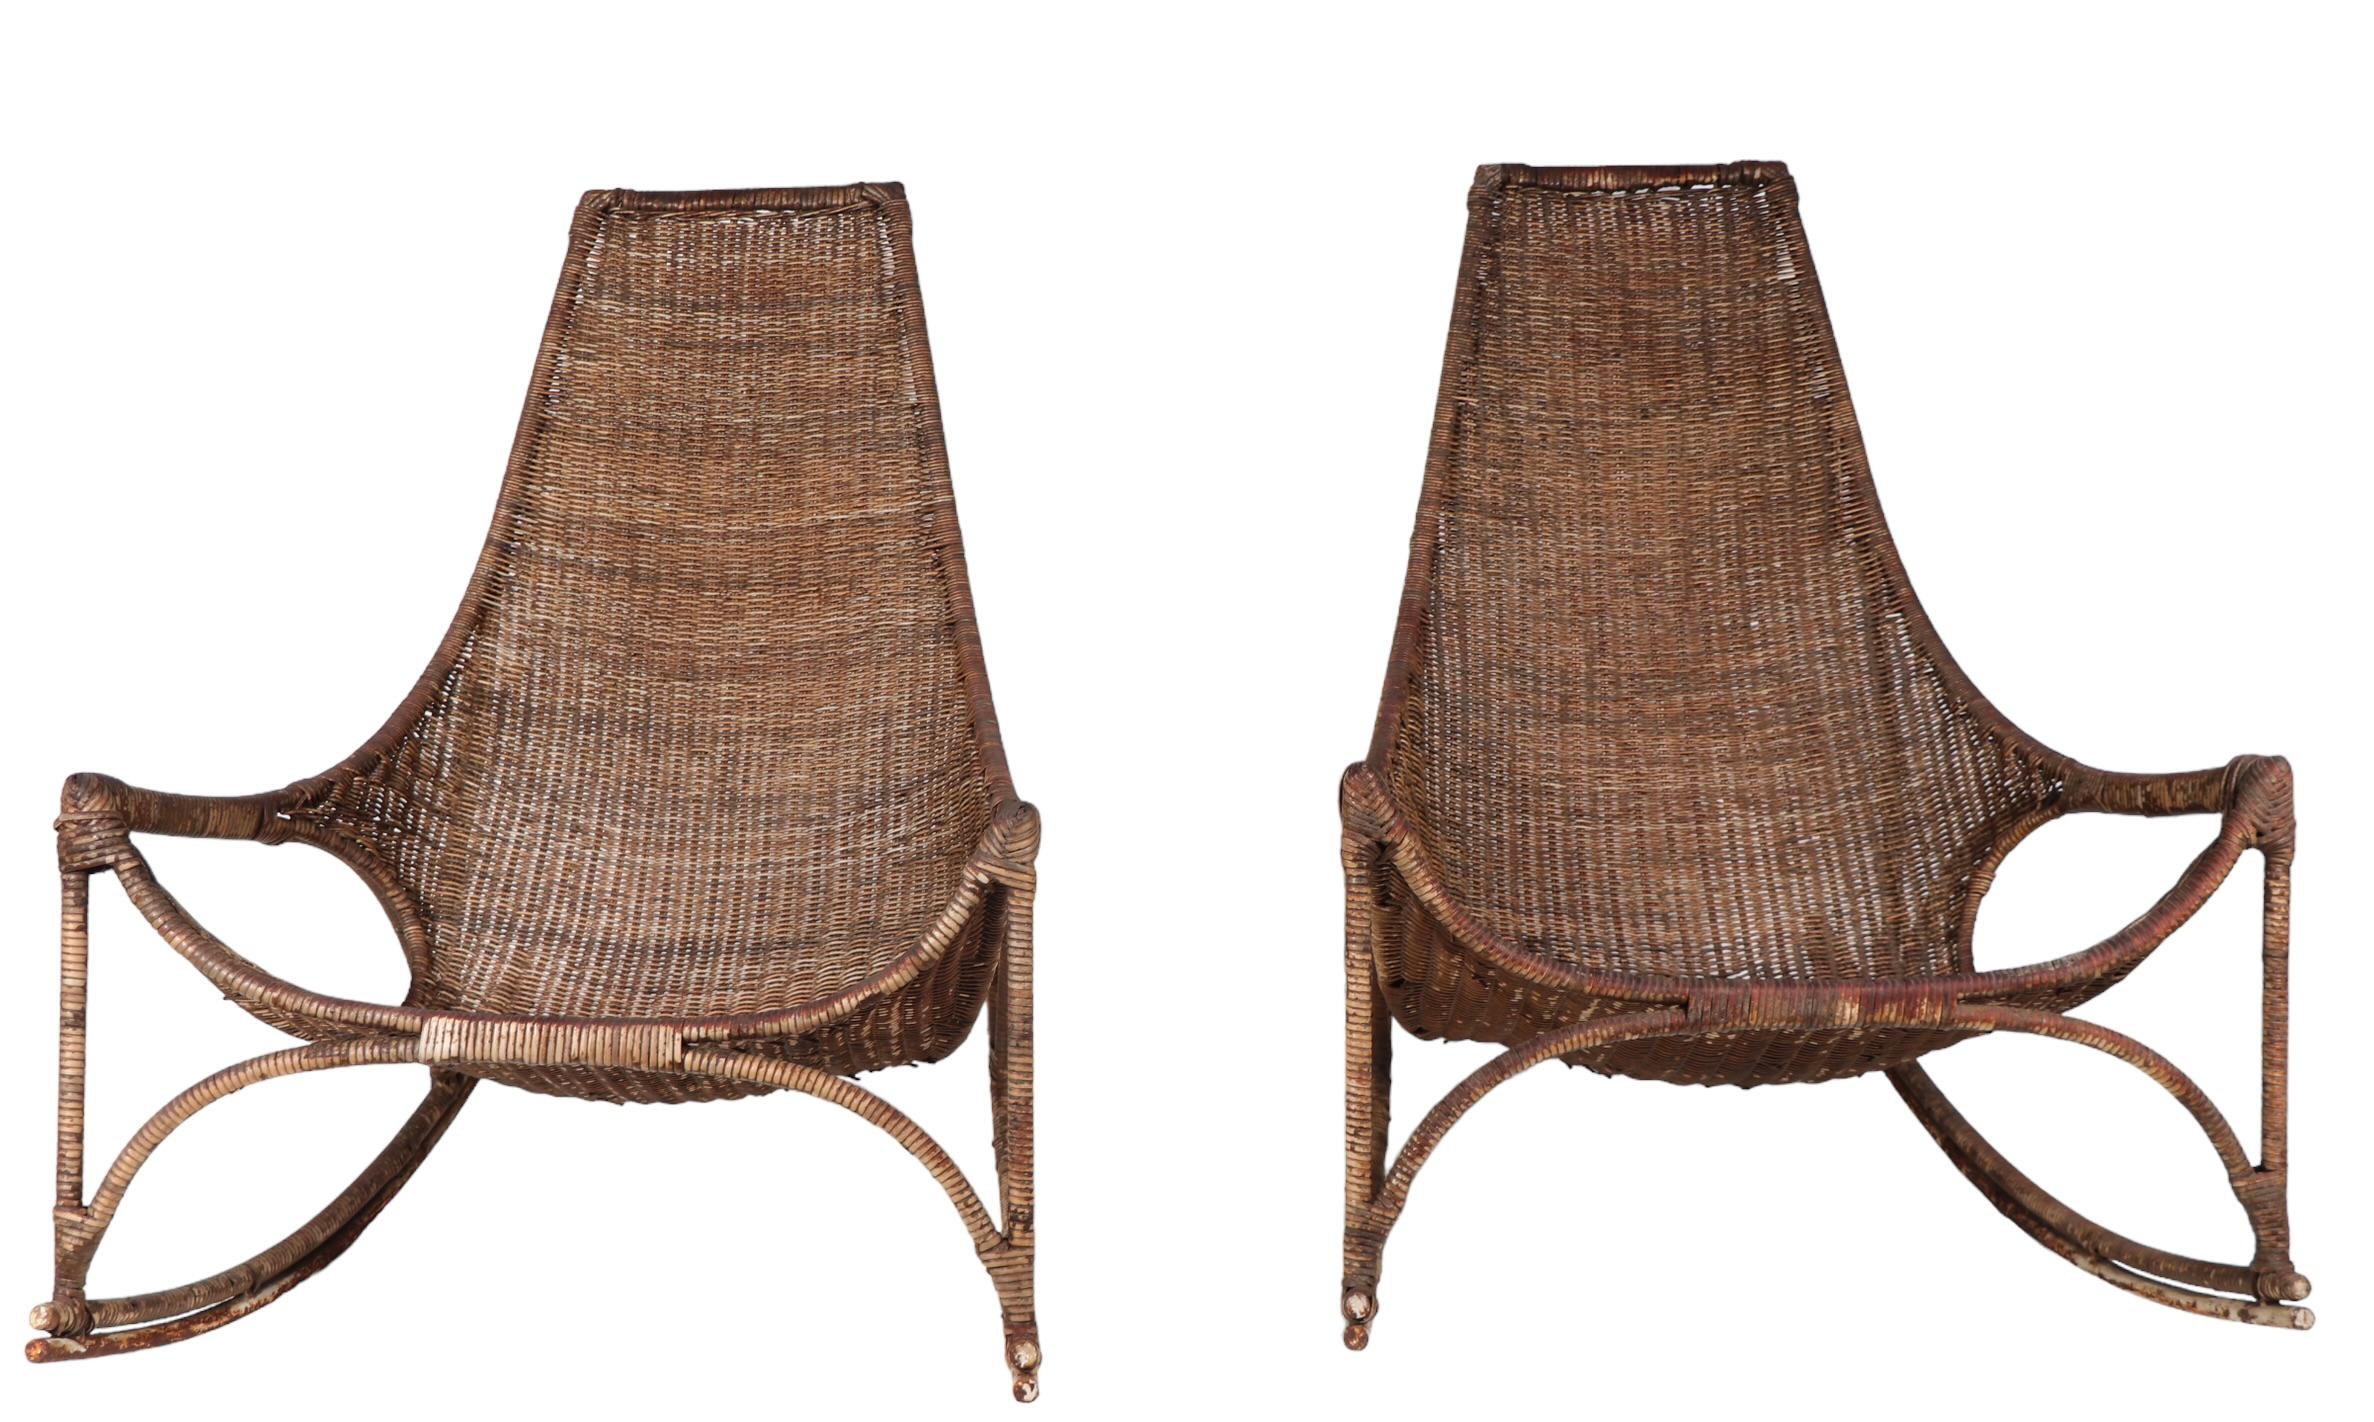 Pr. Wicker Rocking Chairs by Francis Mair c 1950/1960's In Good Condition For Sale In New York, NY